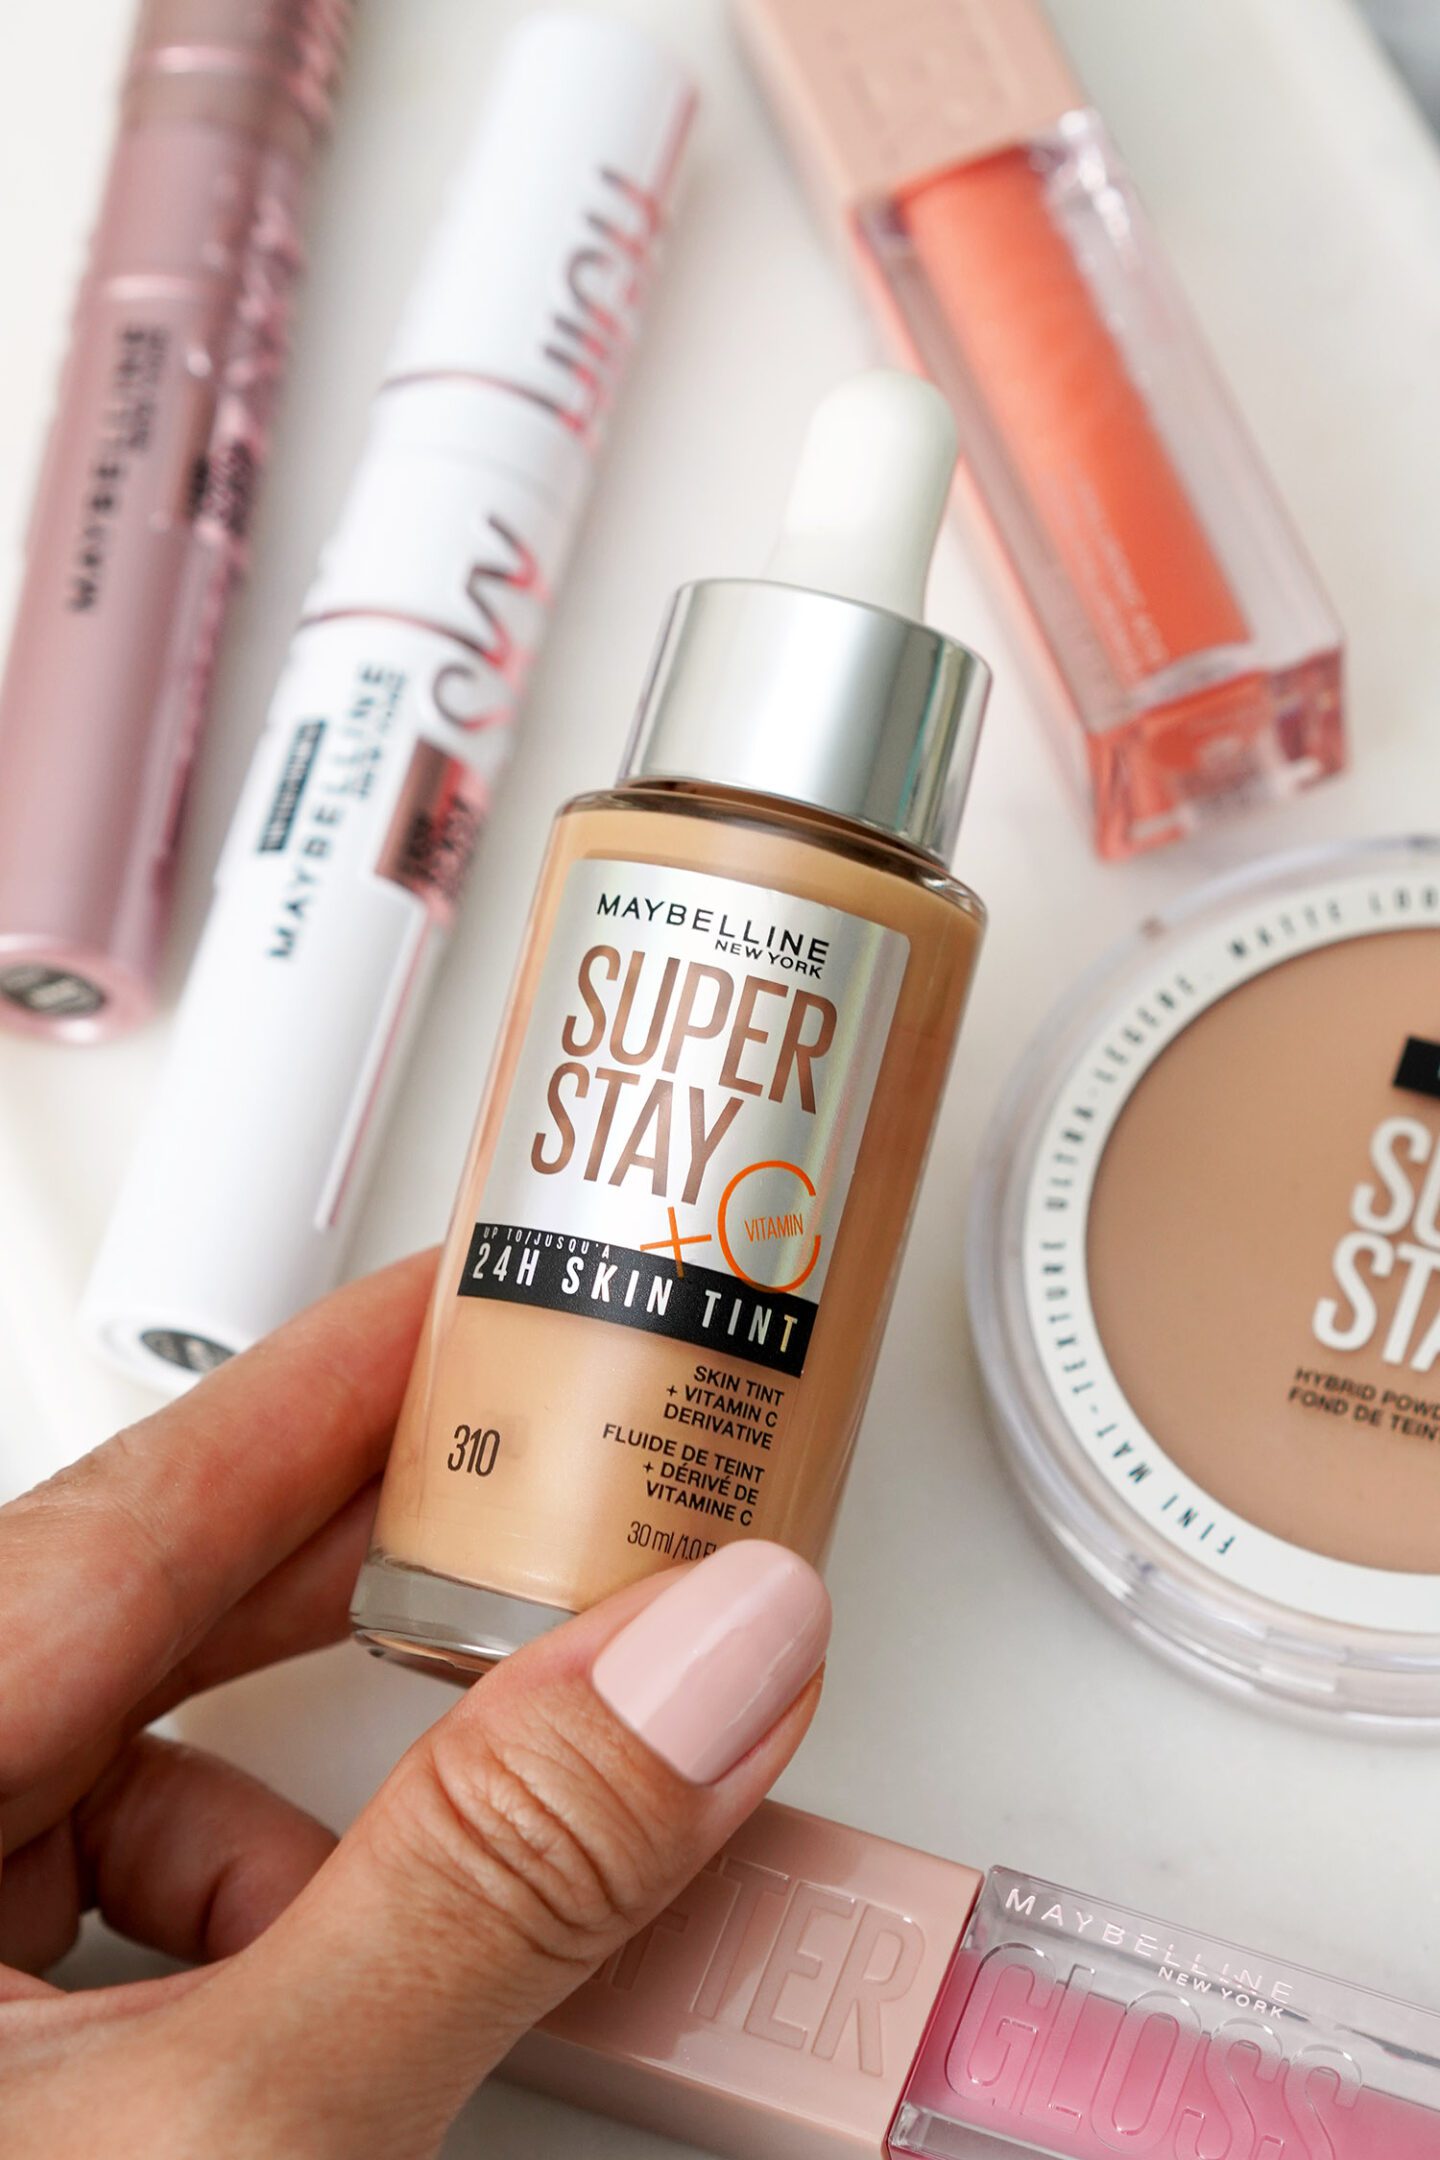 Maybelline Super Skin Tint in Shade 310